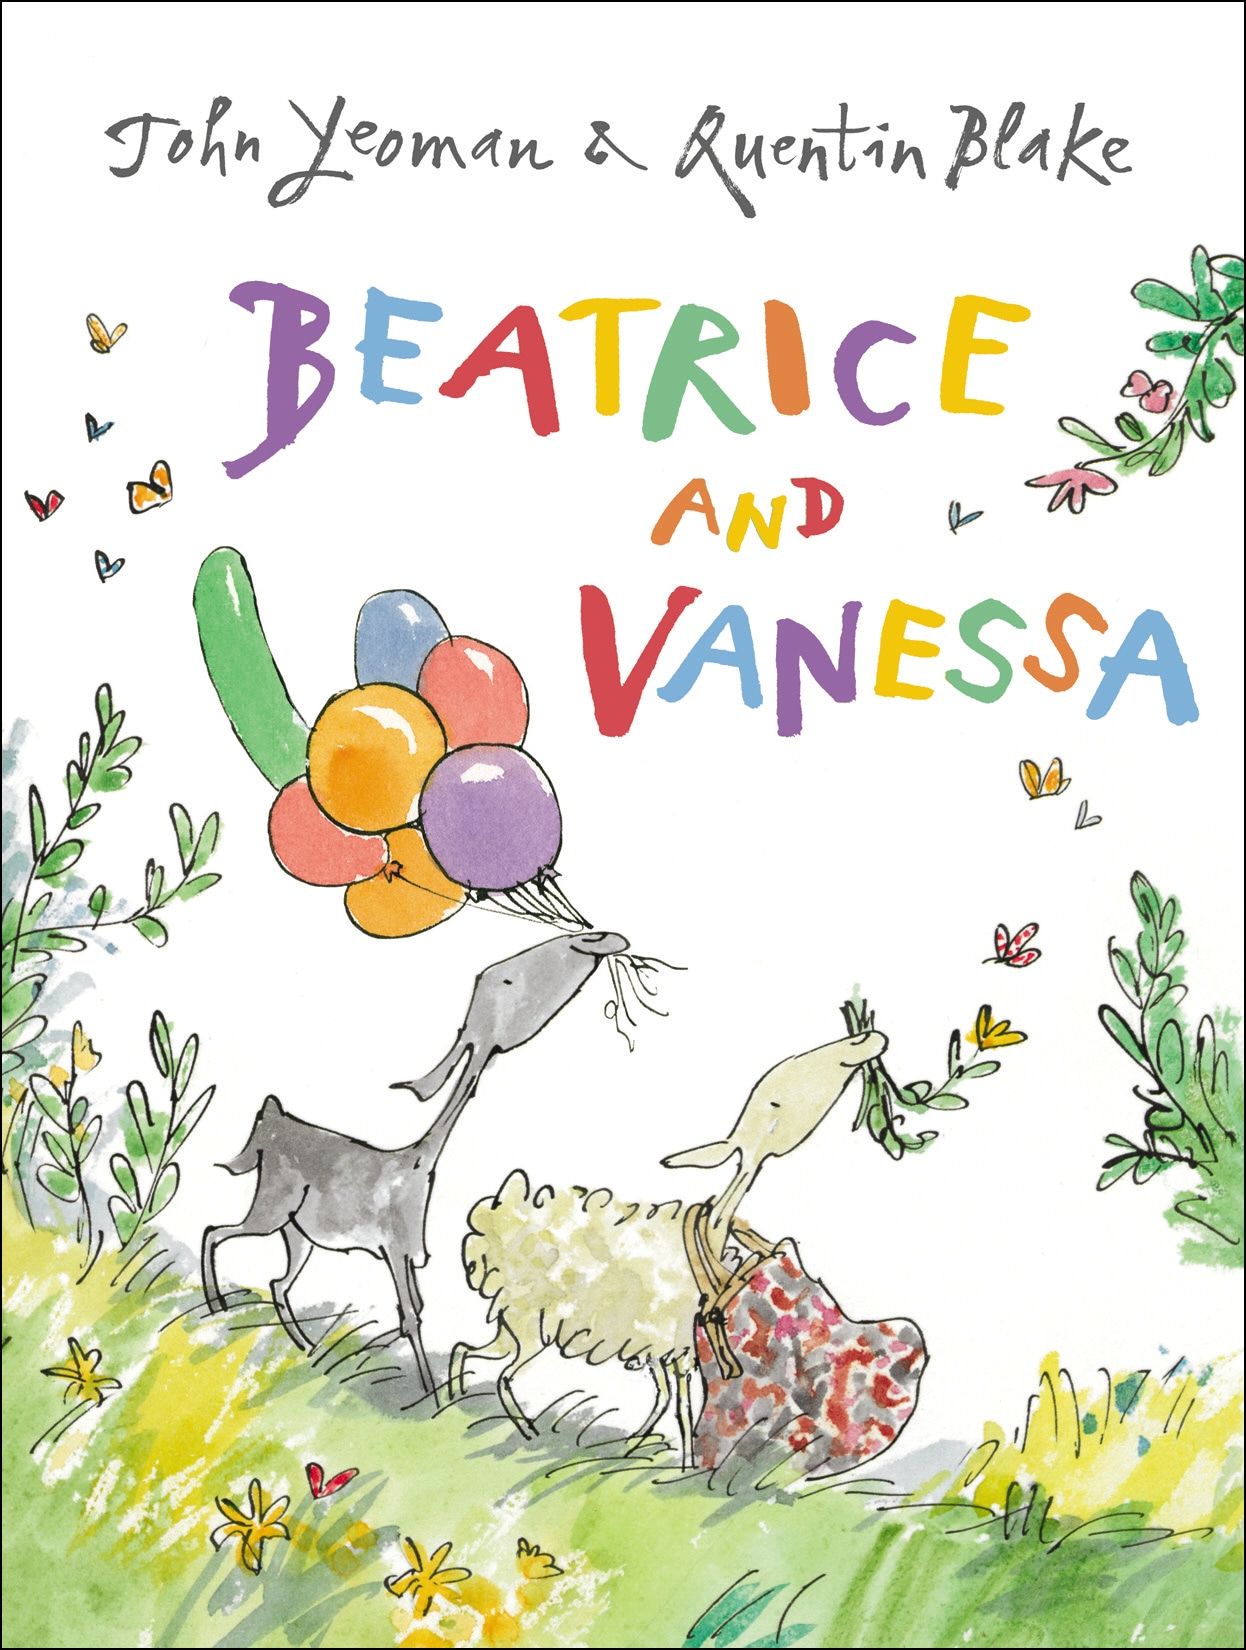 Book “Beatrice and Vanessa” by John Yeoman, Quentin Blake — July 7, 2011